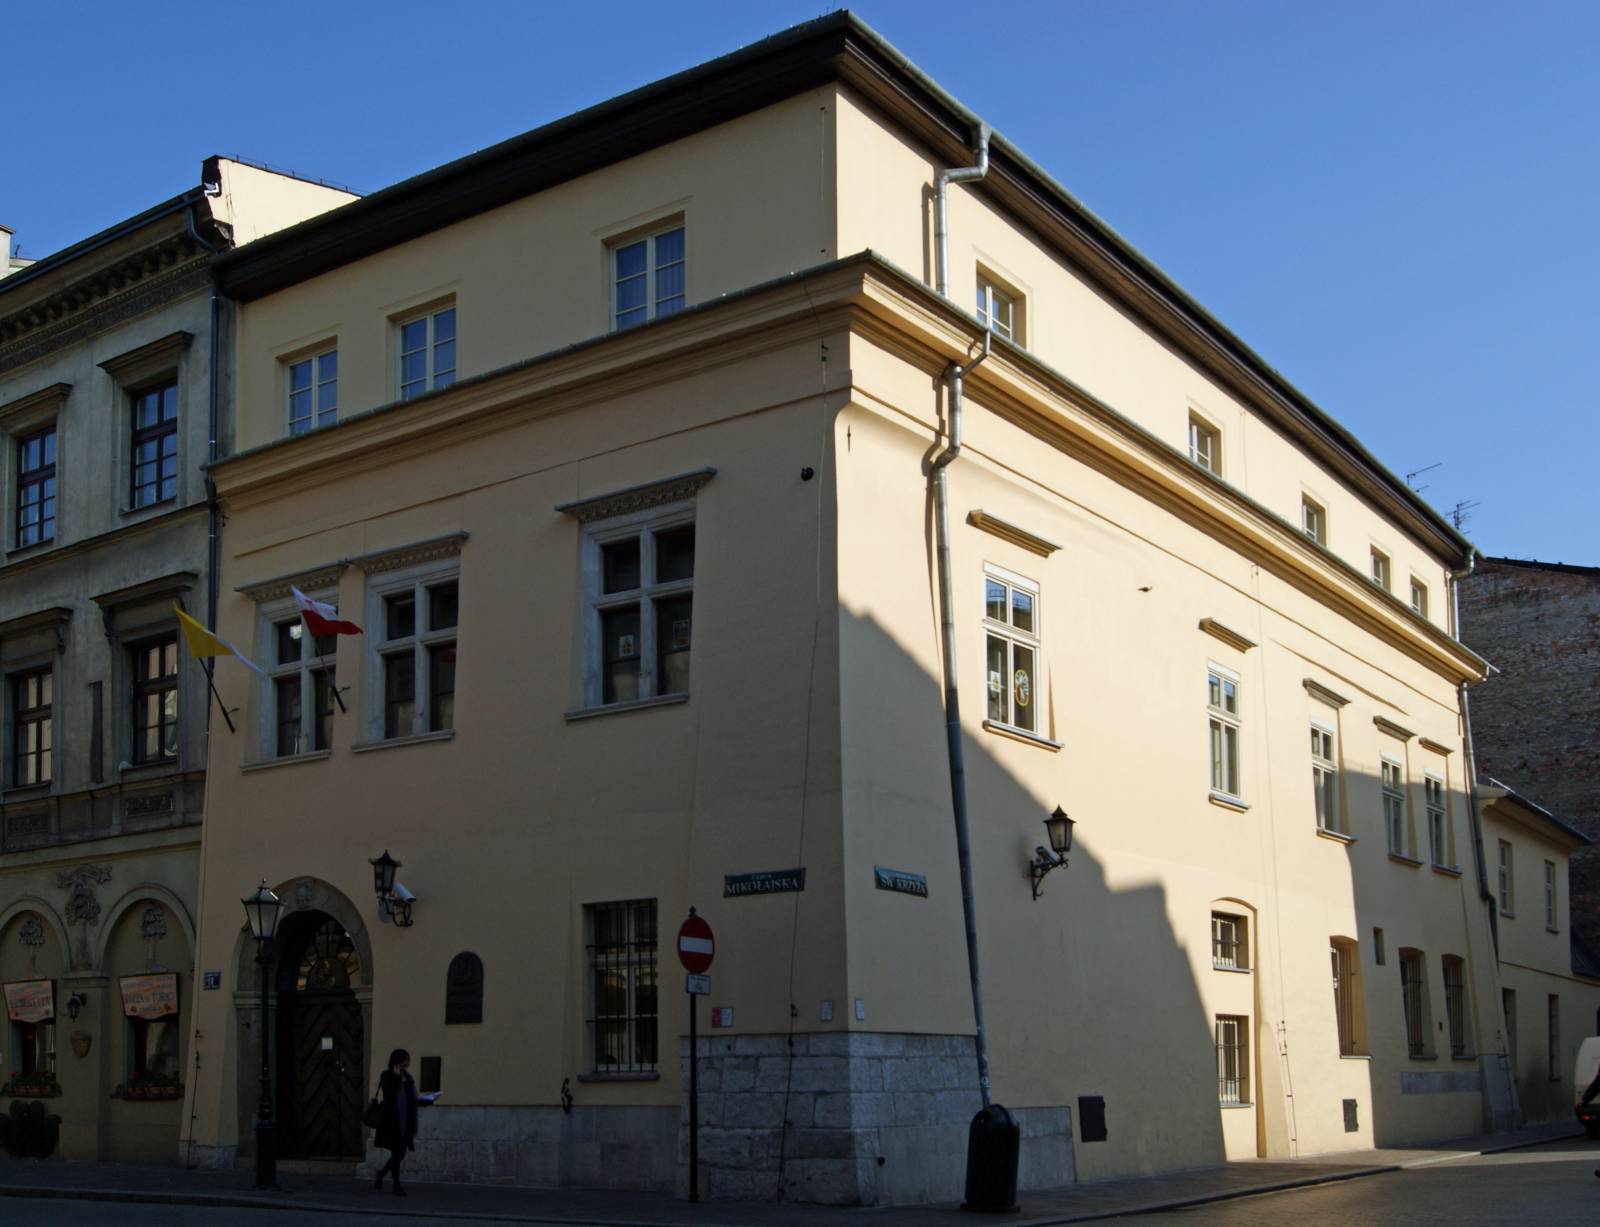 Bl. Maria Angela Truszkowska Museum and Archive